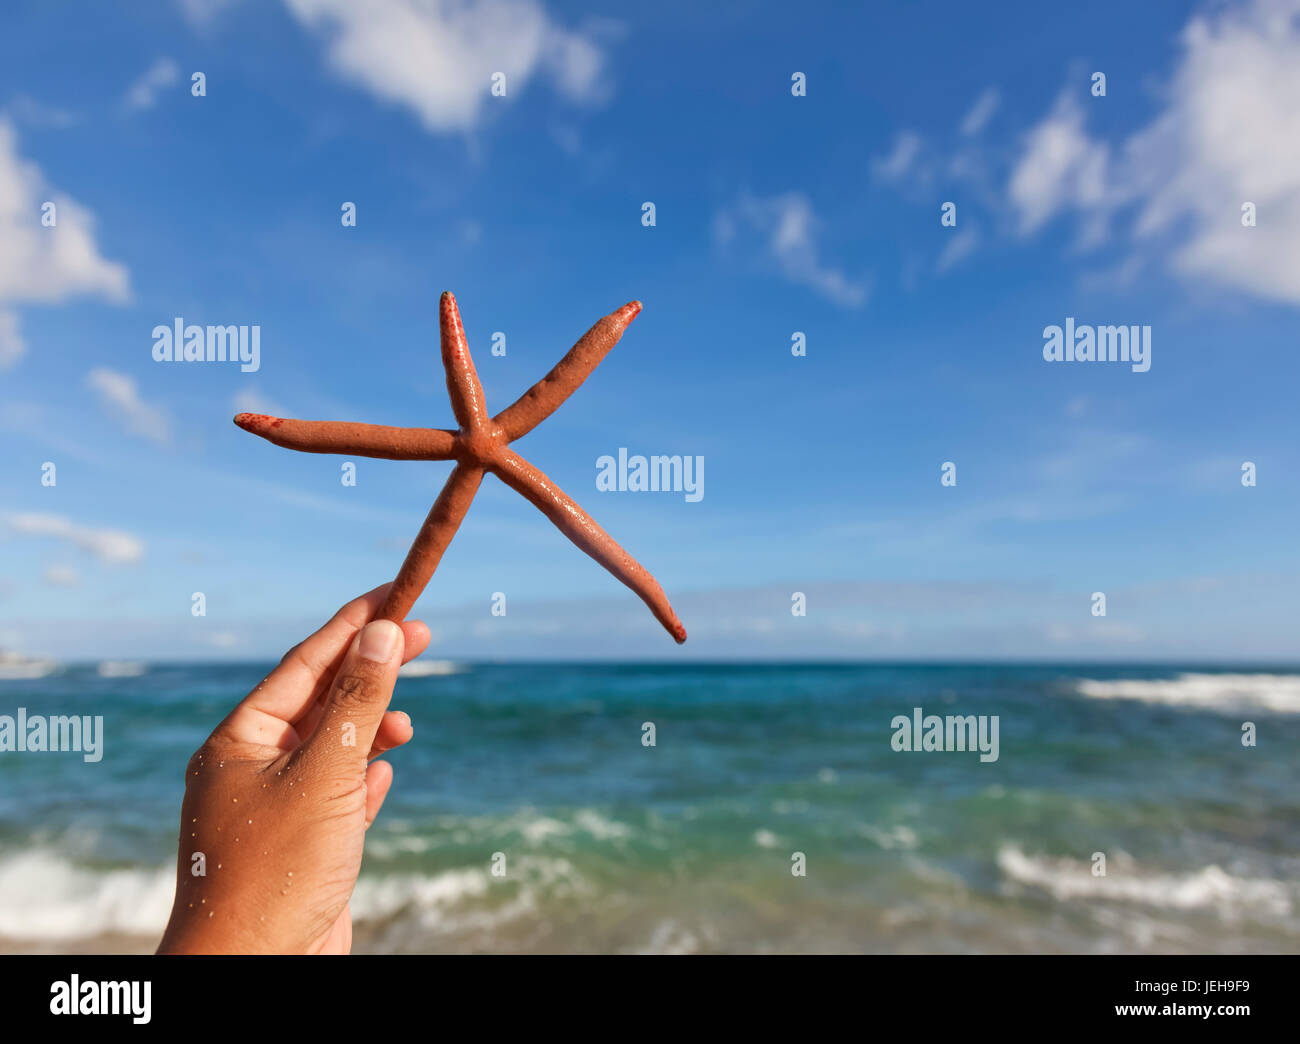 Close-up of a hand holding a Finger Starfish, also known as Linckia Sea Star, found along the coastal beach Stock Photo